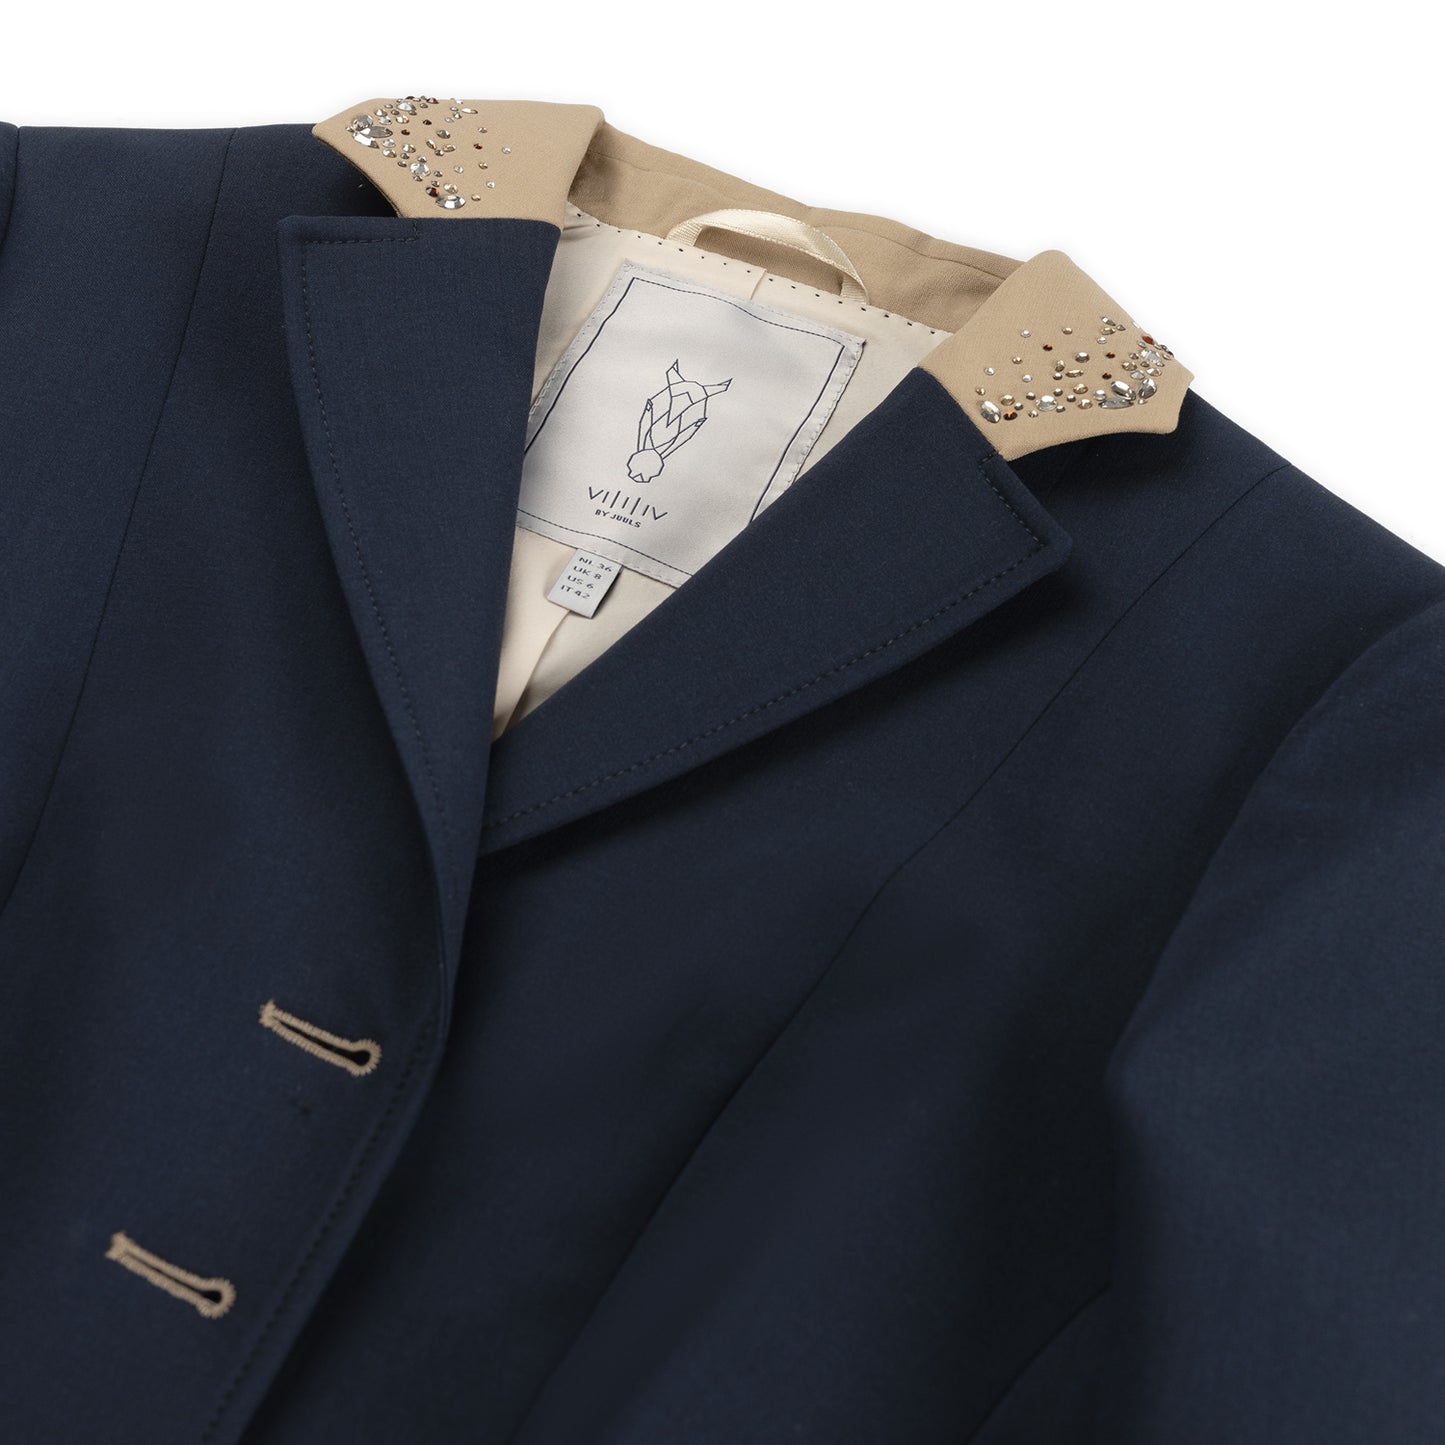 Navy competition jacket - Almond